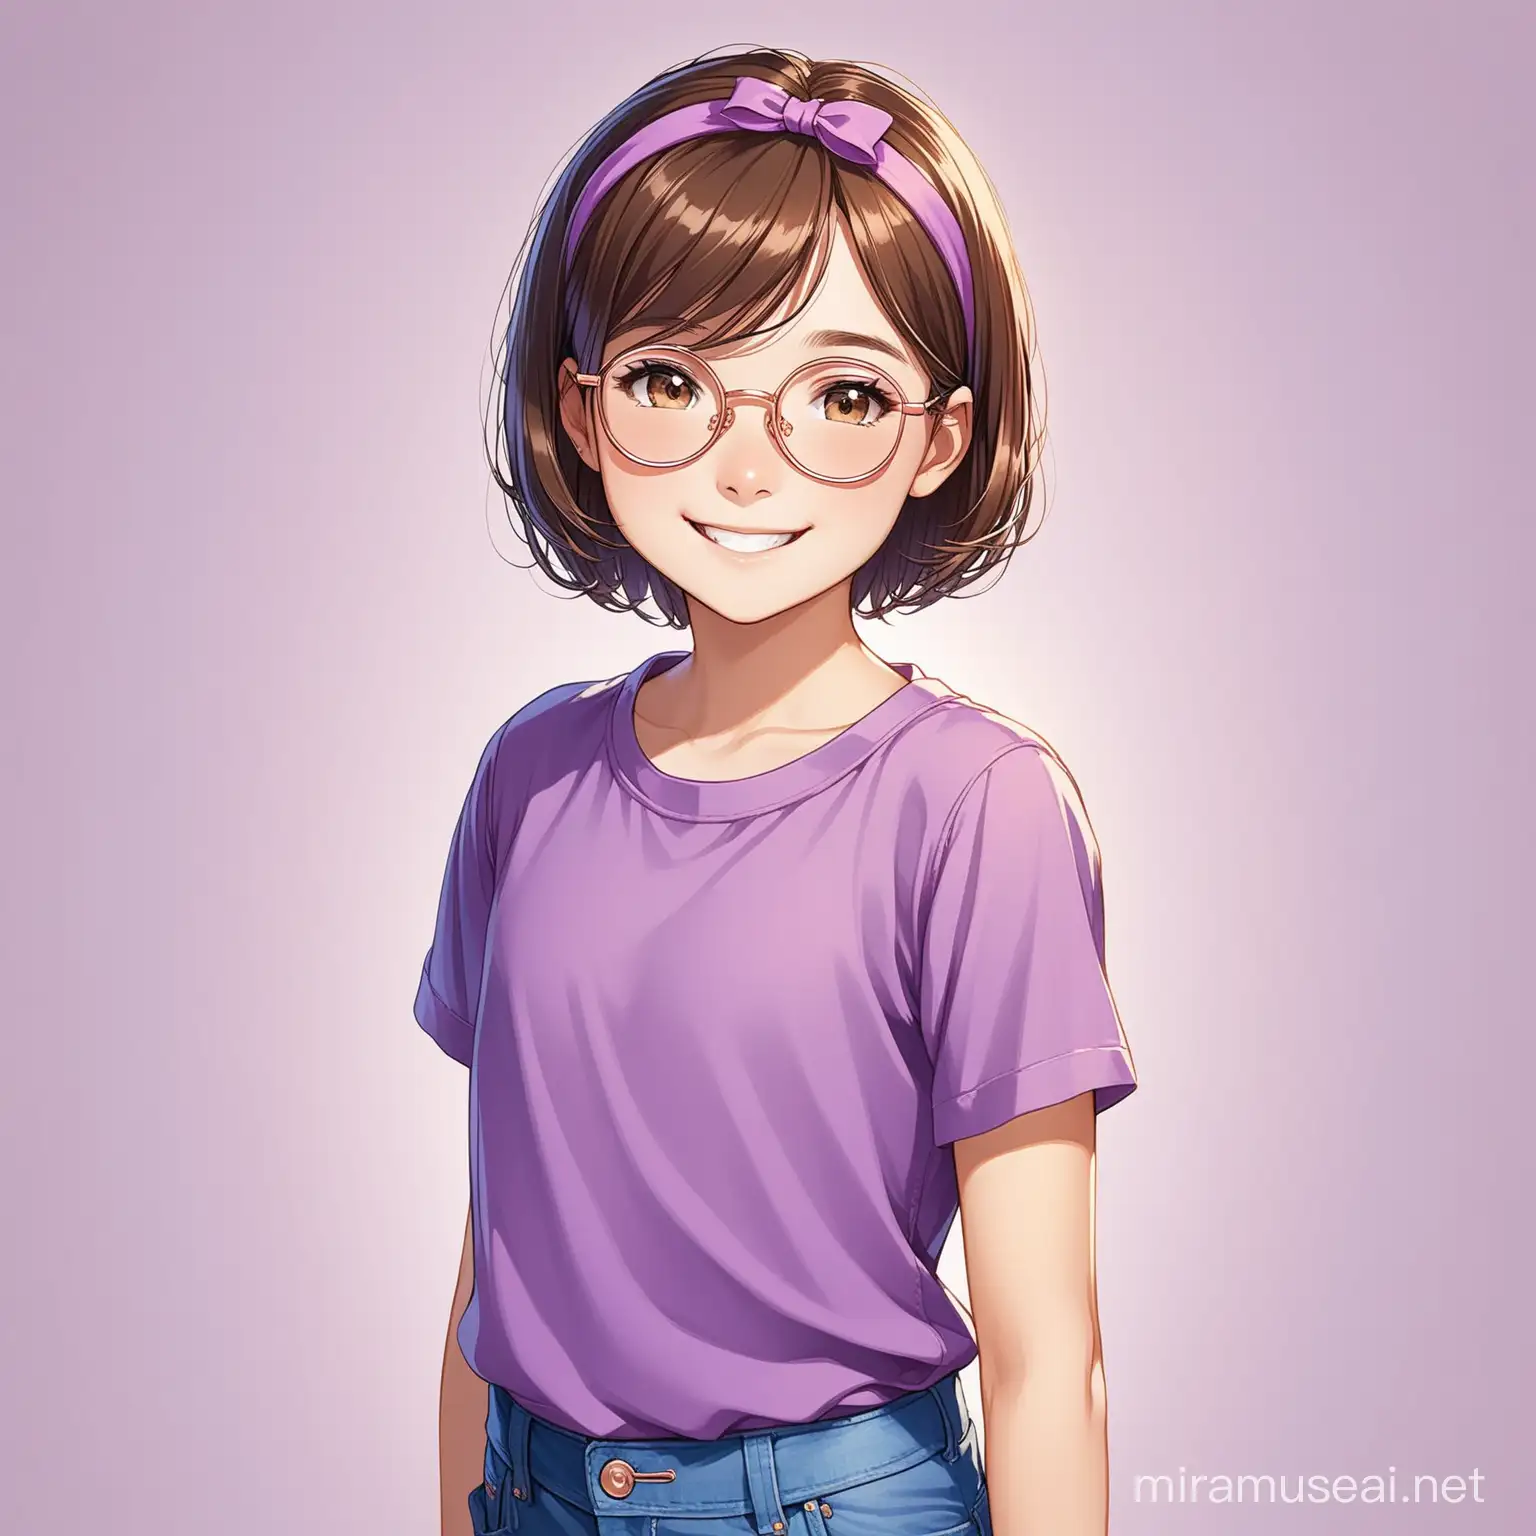 12 year old girl, short brown hair, rose gold glasses, head band, smiling, wearing purple shirt and jeans